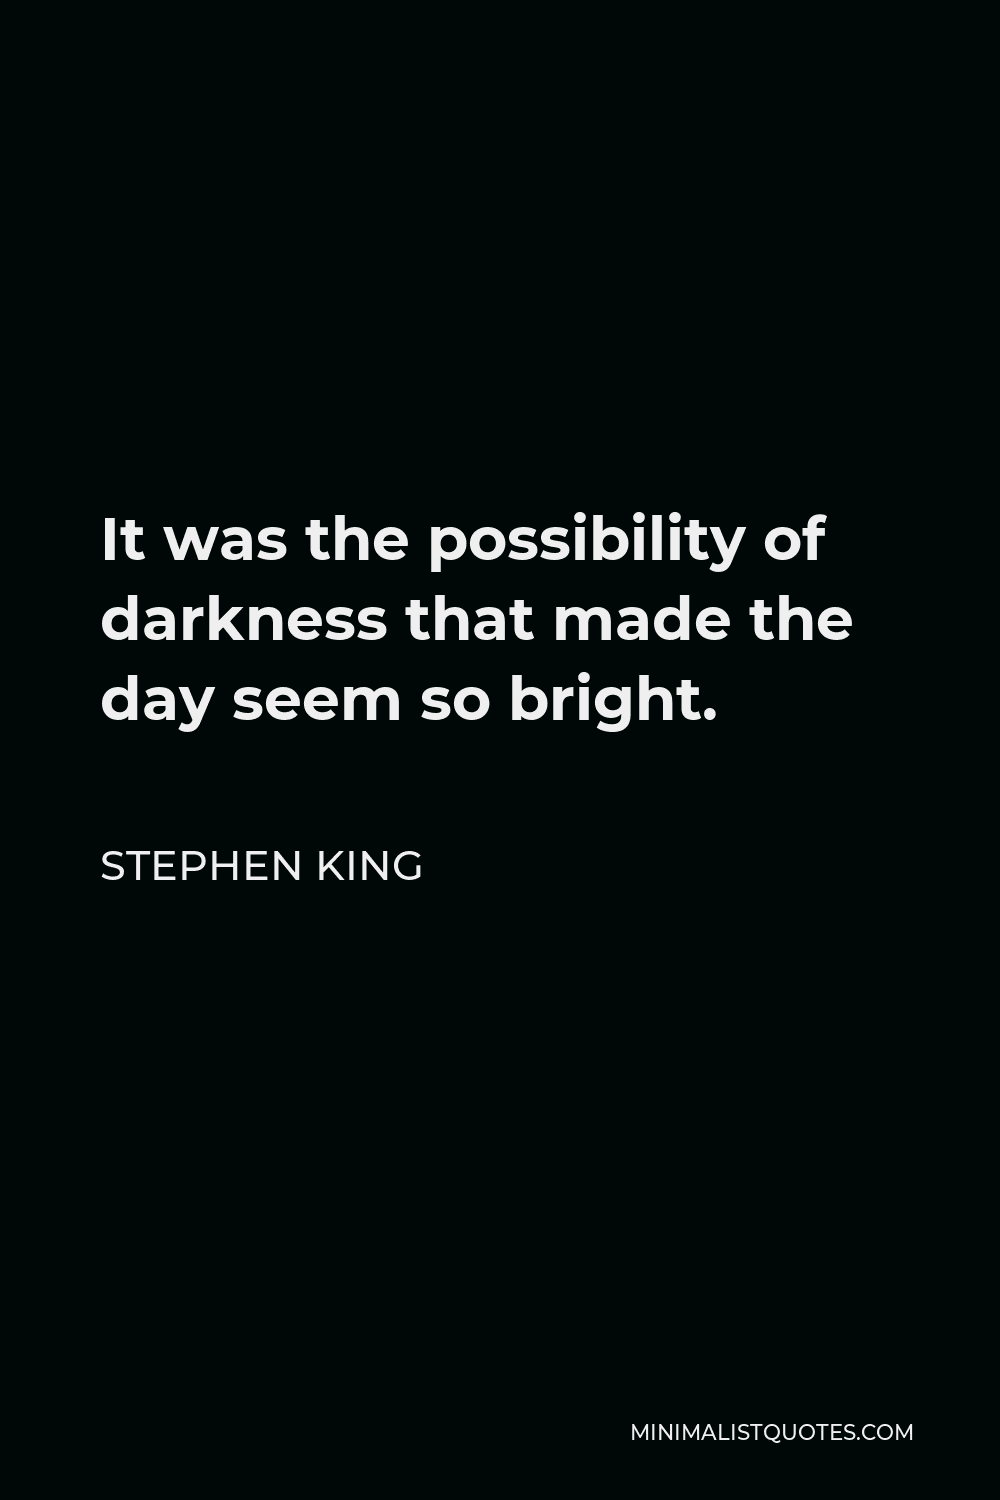 Stephen King Quote - It was the possibility of darkness that made the day seem so bright.